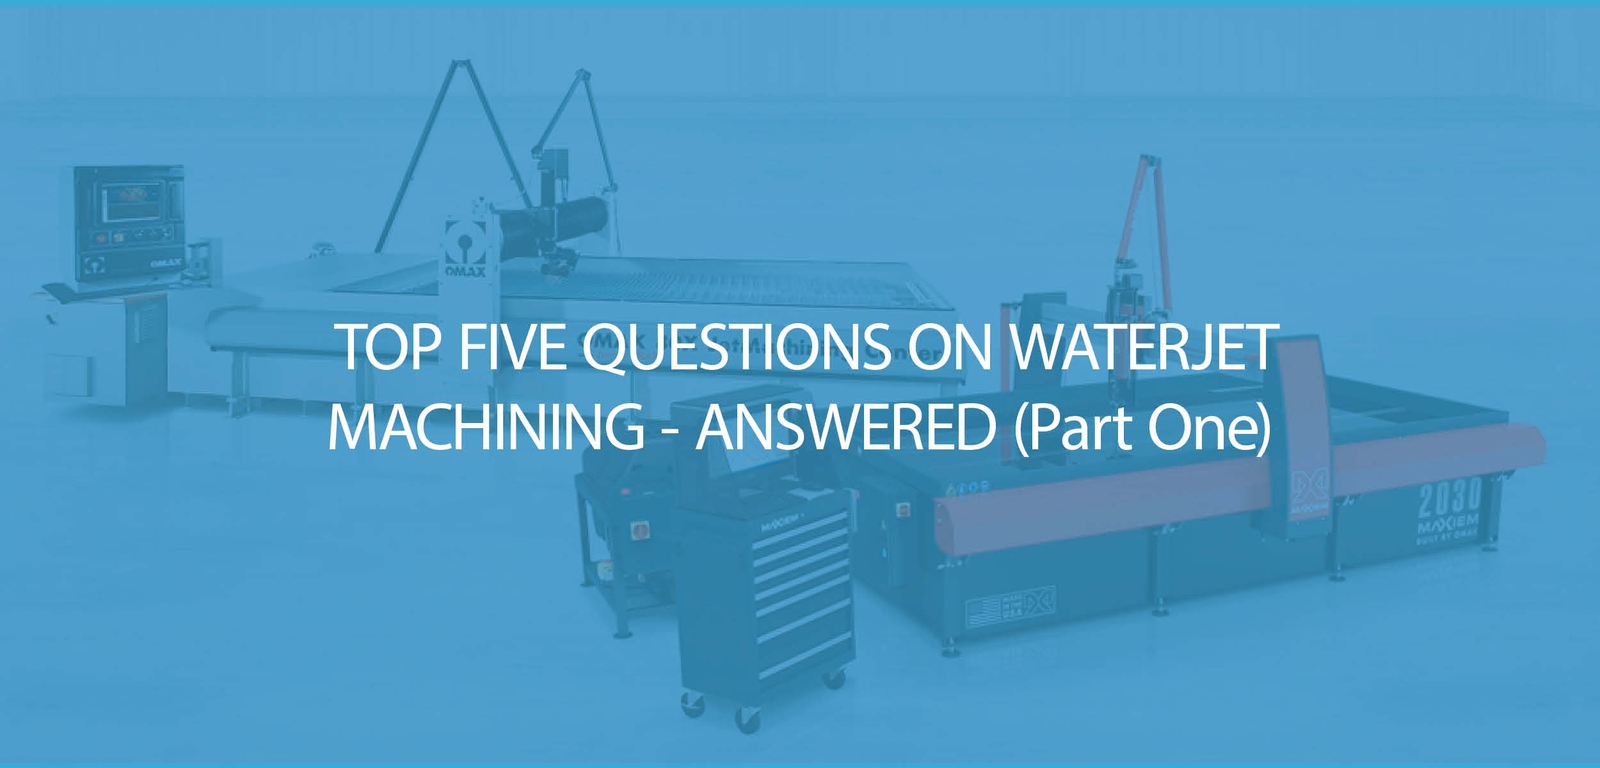 Waterjet Machining – Your Top Five Questions Answered, Part One